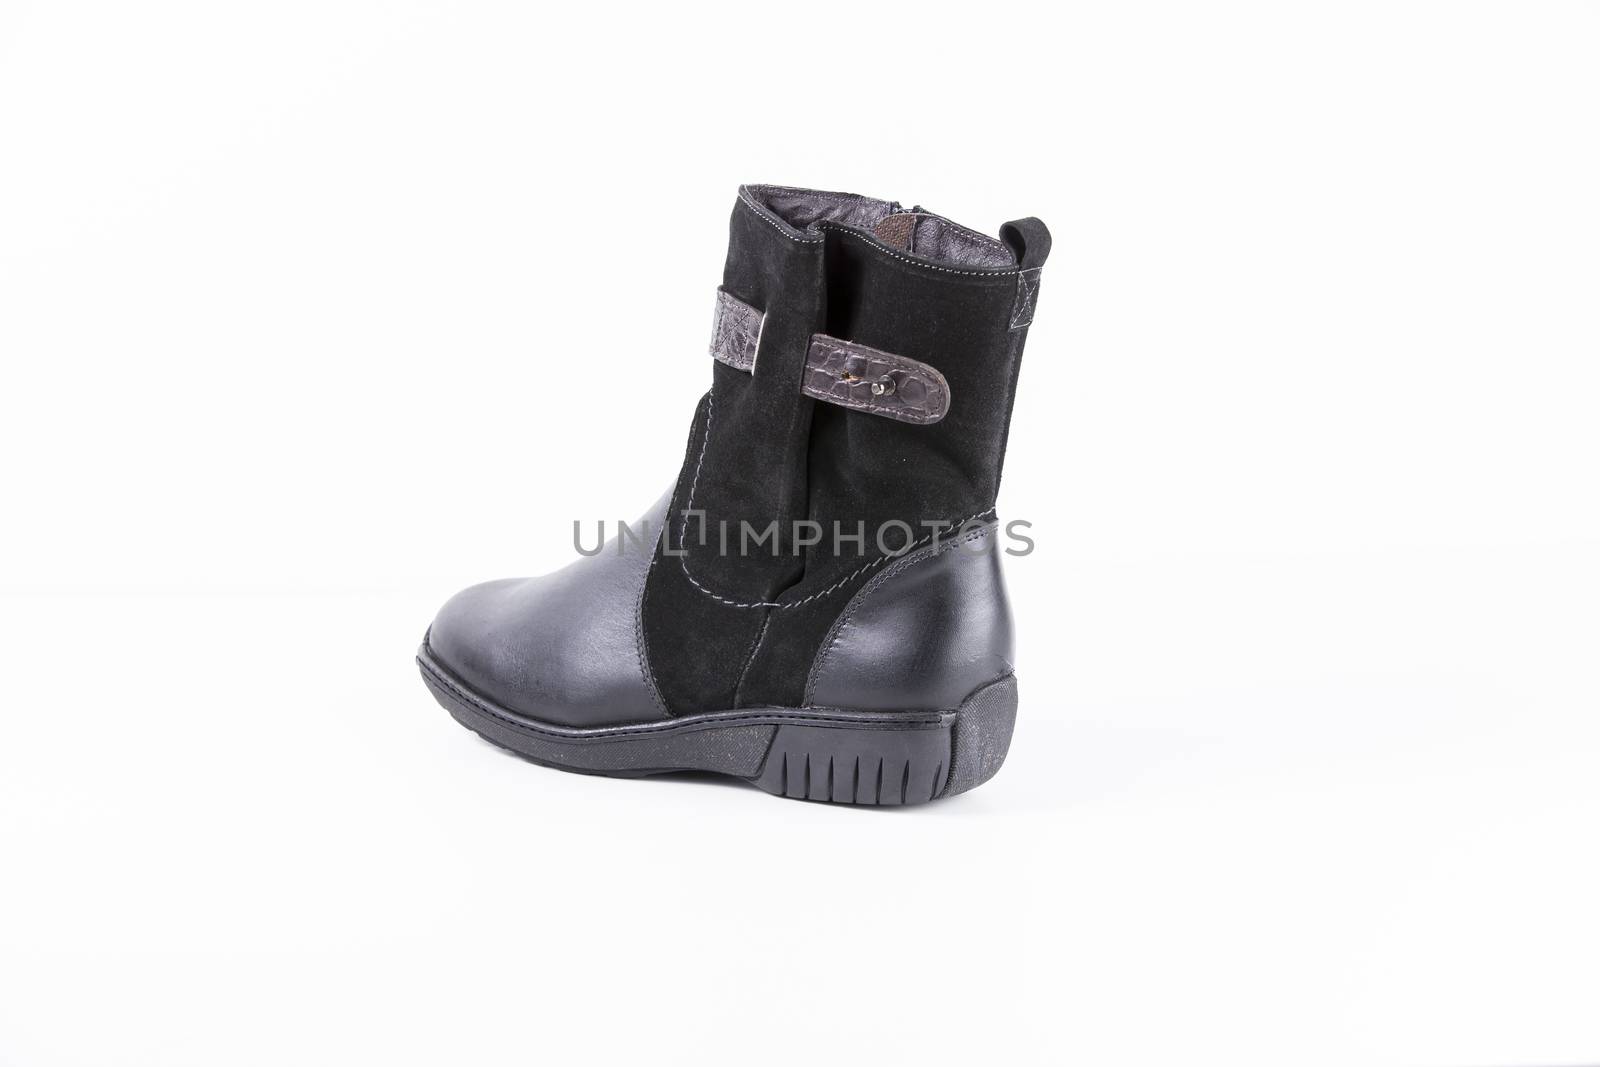 Black leather boots on white background, isolated product.